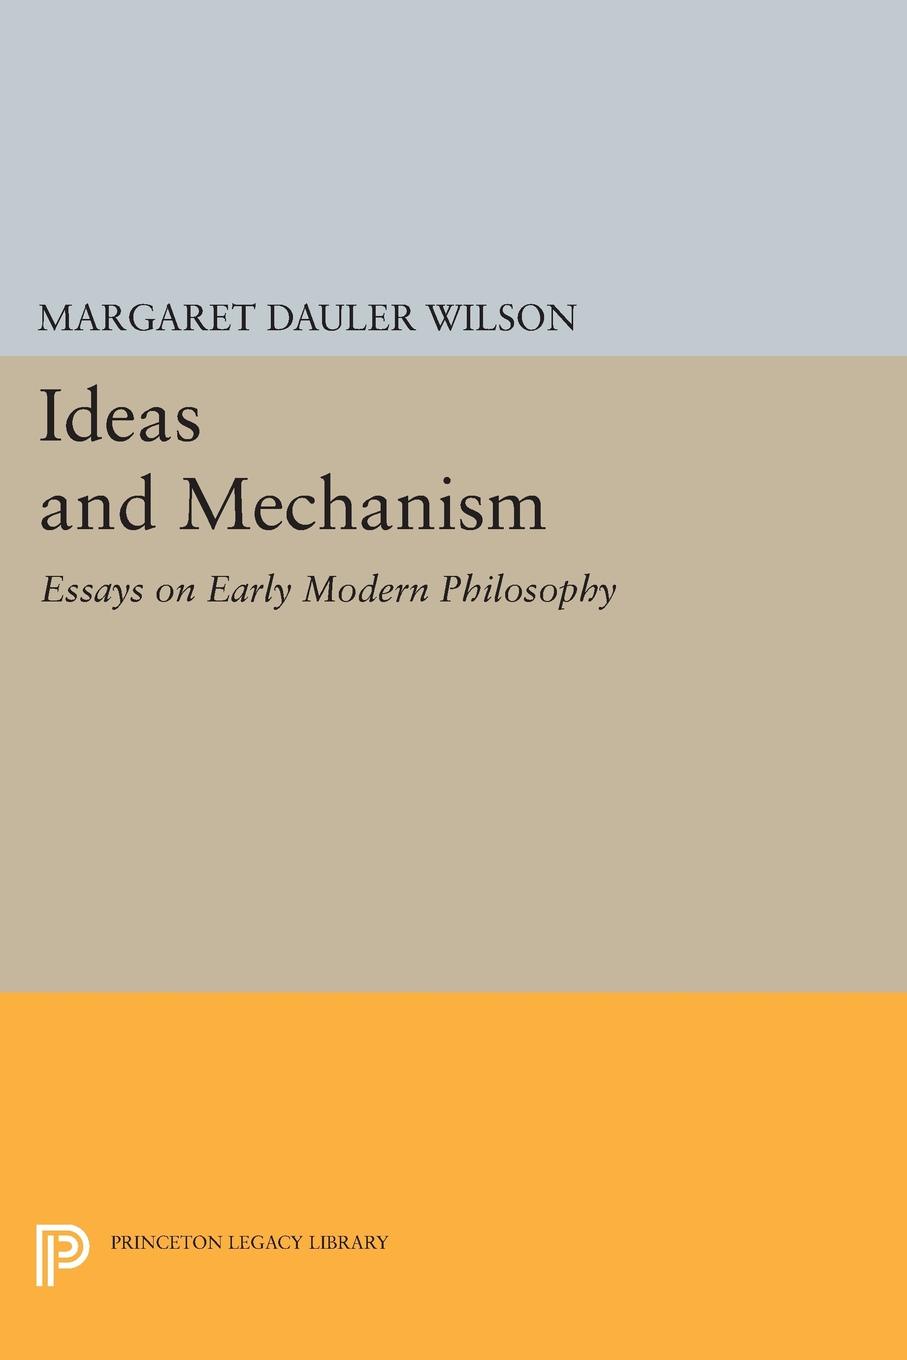 Ideas and Mechanism. Essays on Early Modern Philosophy